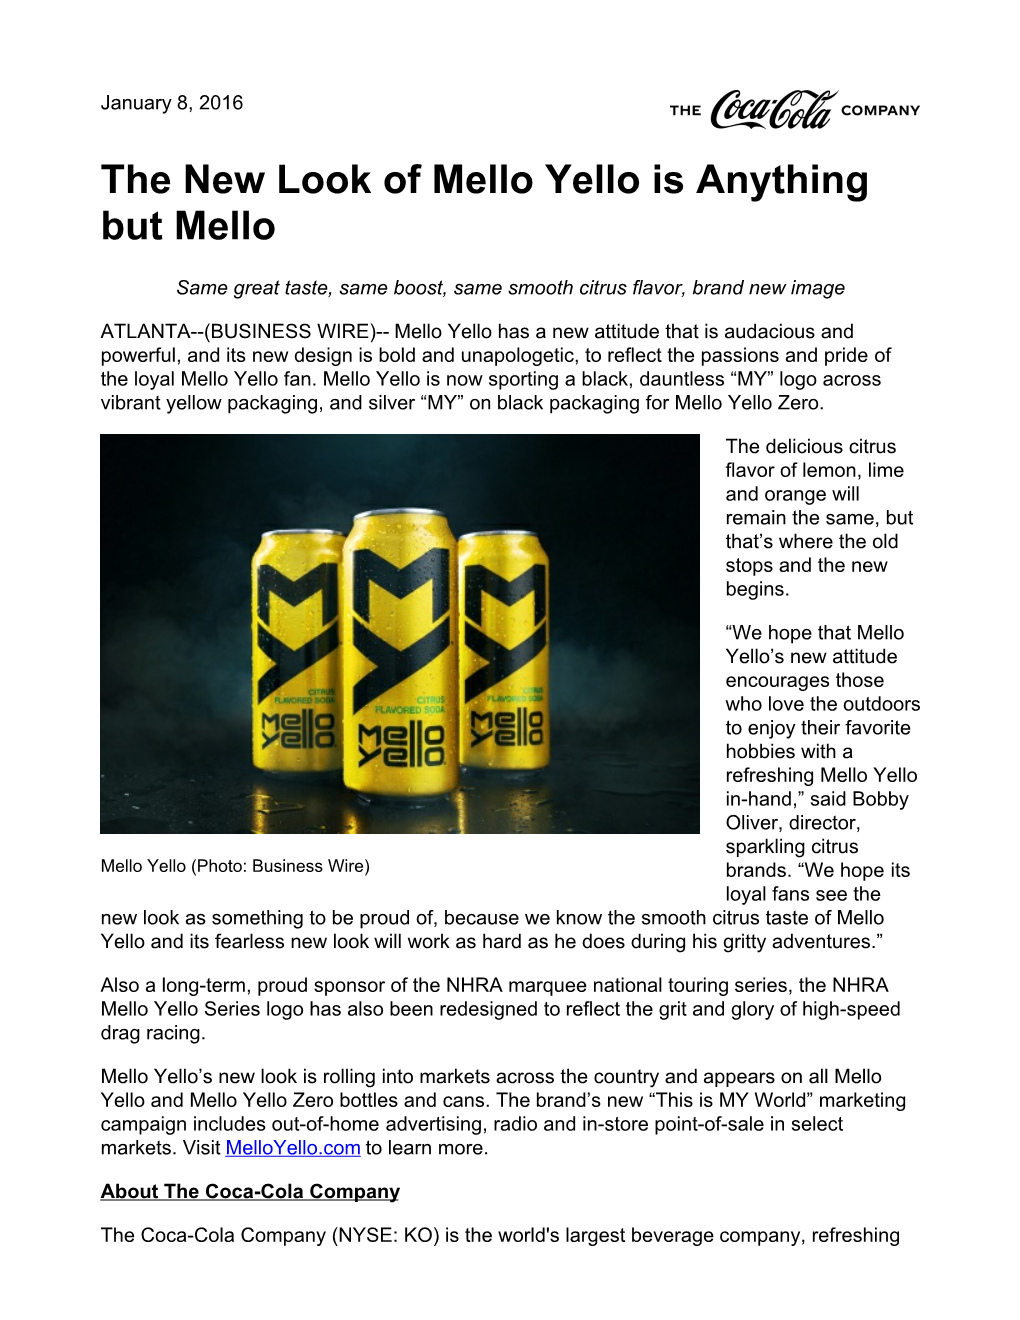 The New Look of Mello Yello Is Anything but Mello